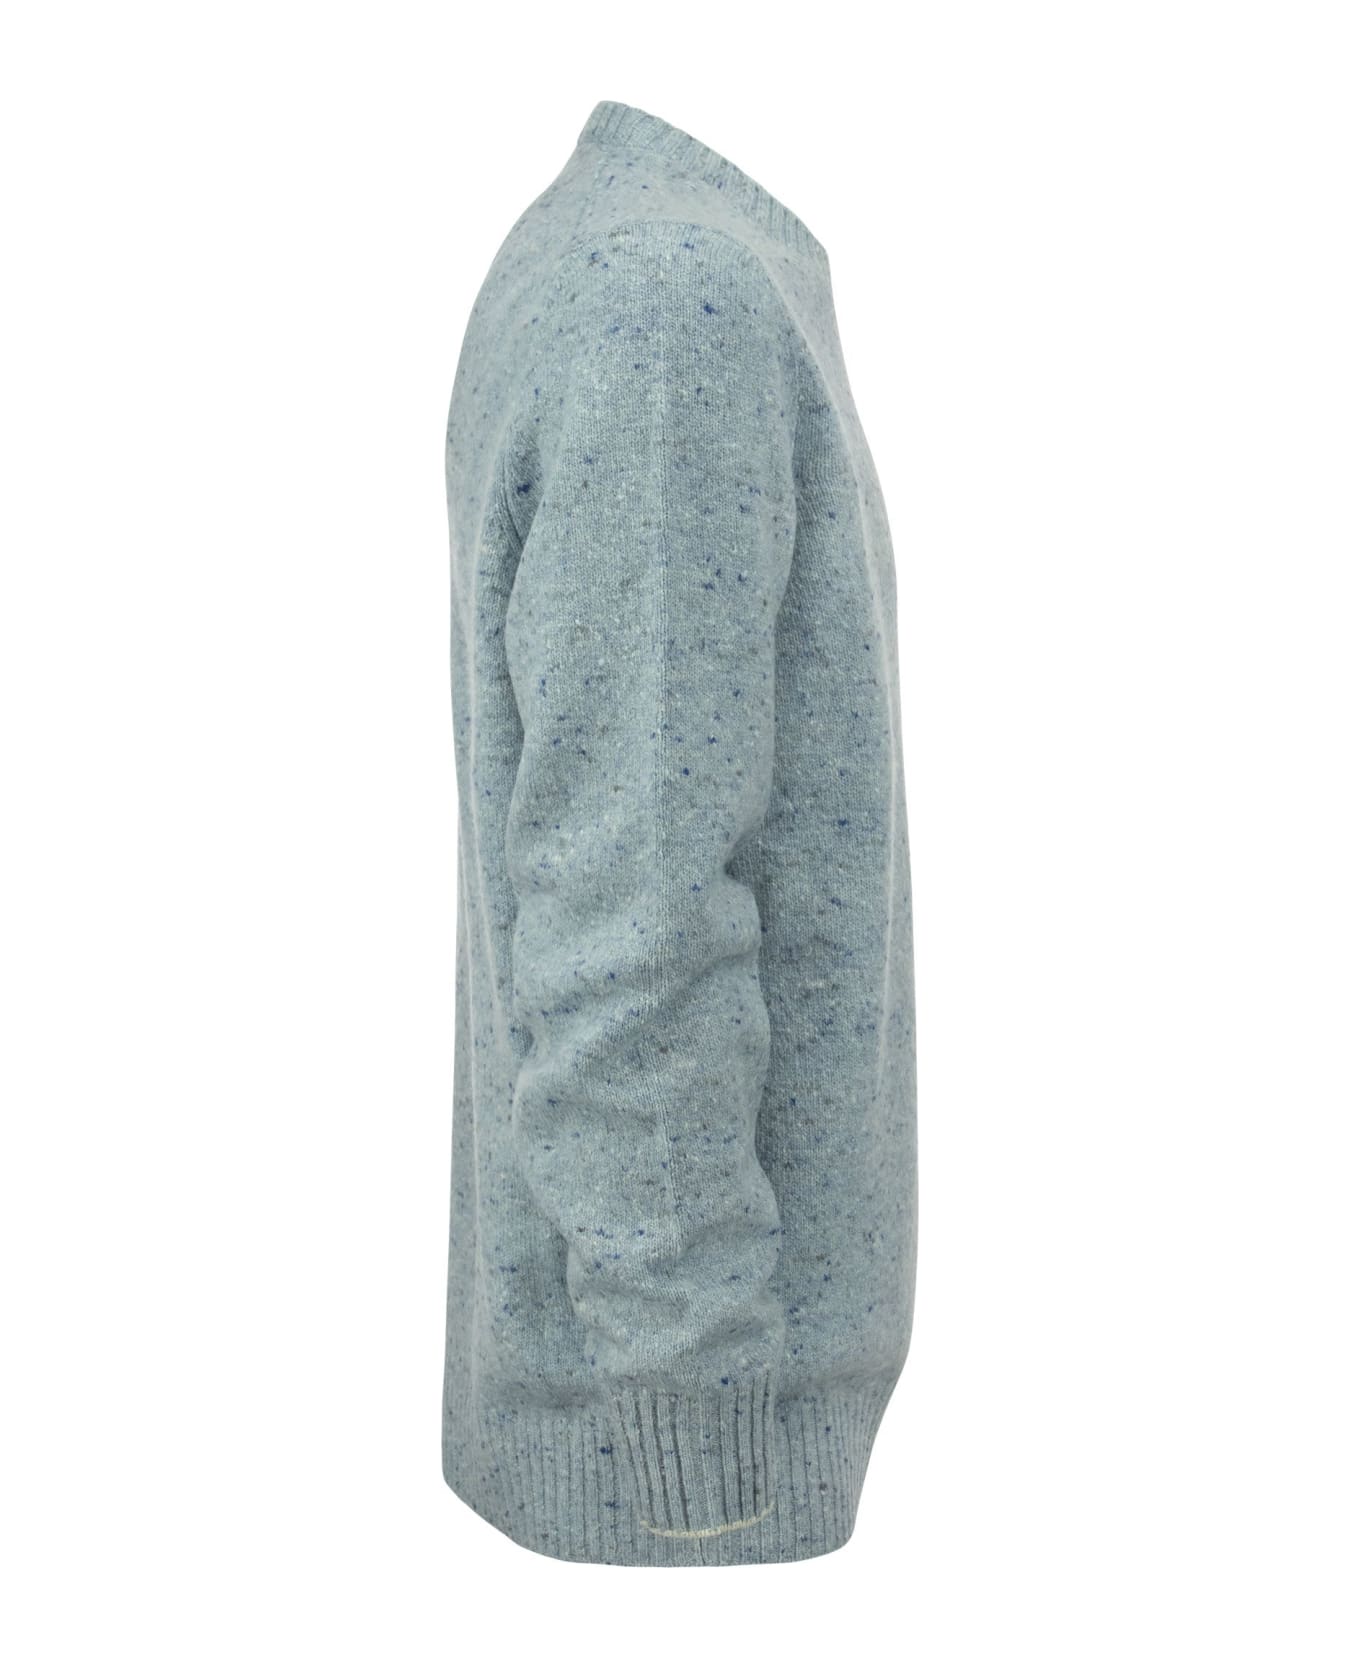 Brunello Cucinelli Crew-neck Sweater In Wool And Cashmere Mix - Light Blue